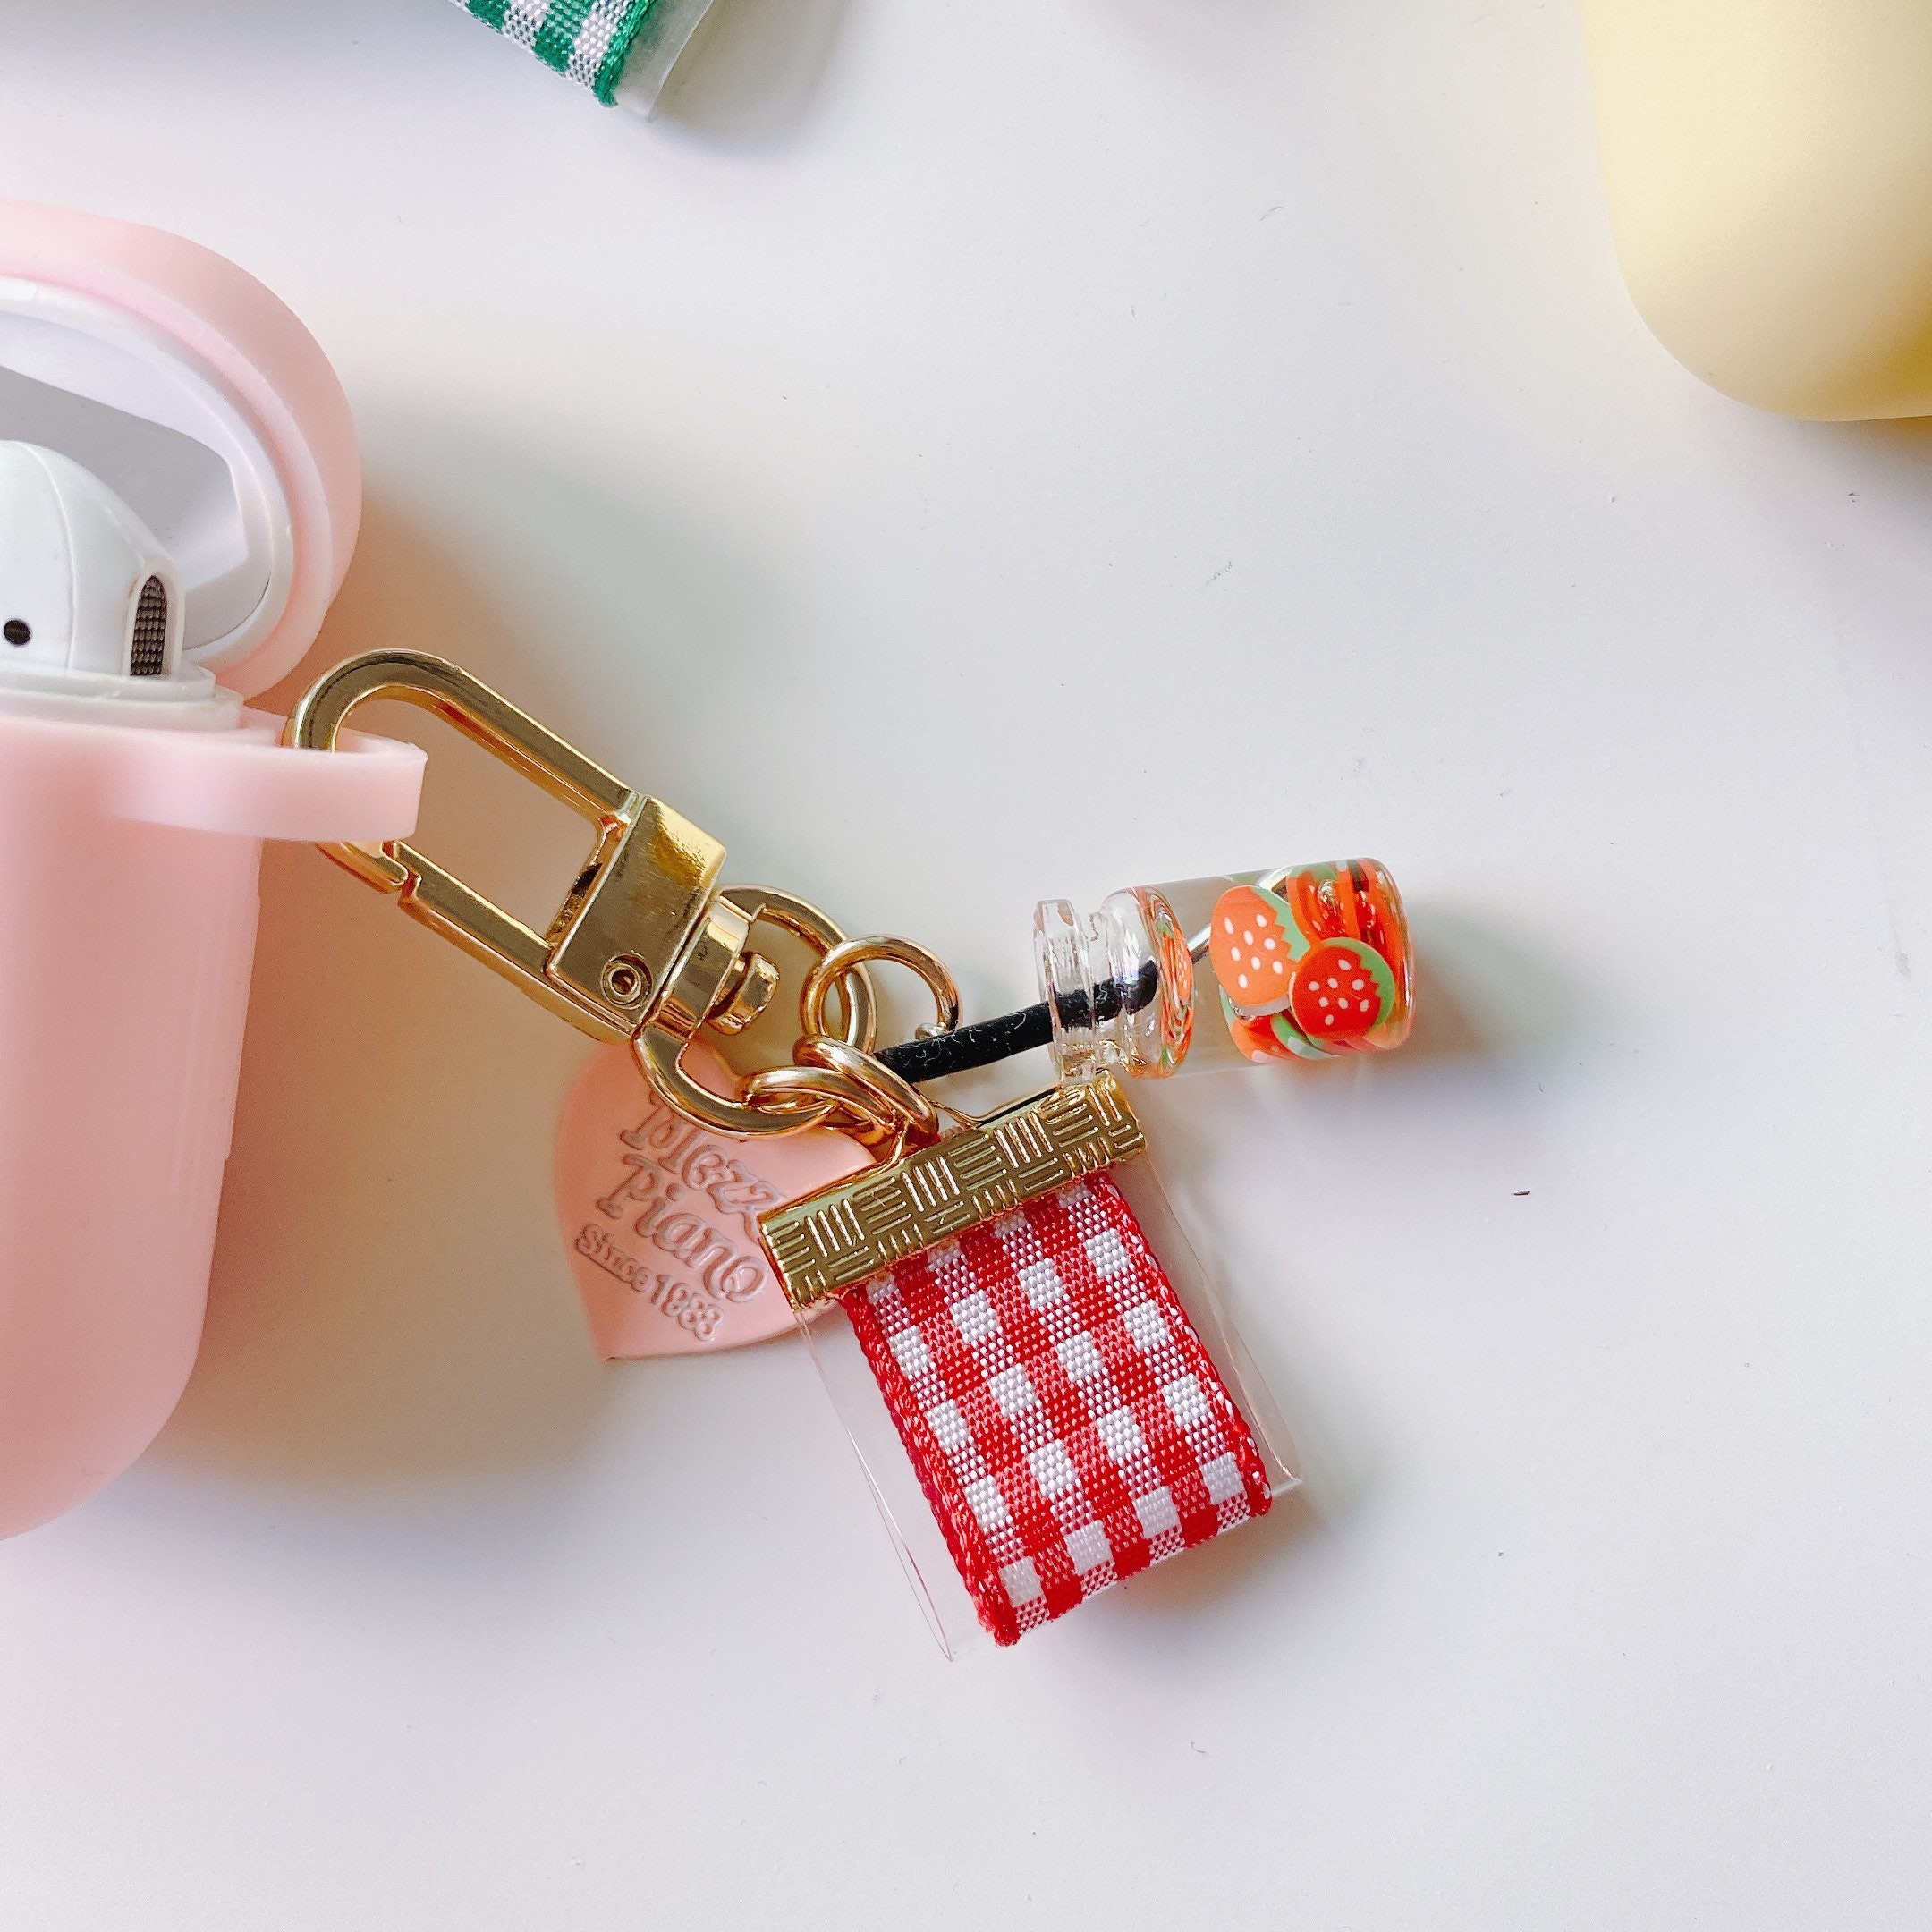 Strawberry tea and lemon tea airpod case and airpods pro | Etsy